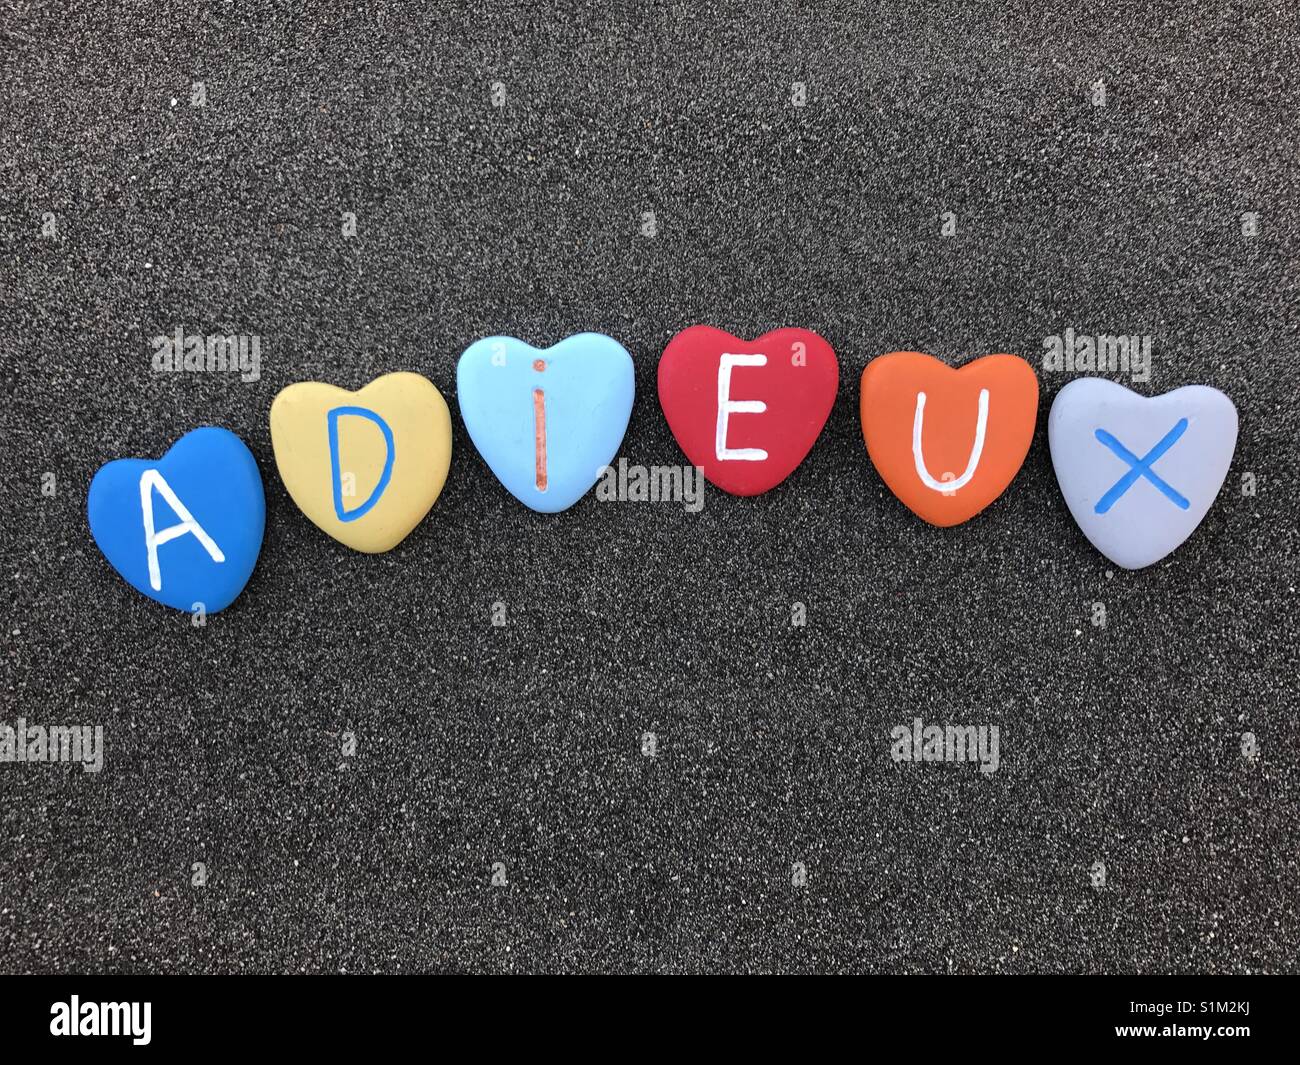 Adieux, french goodbye with multicolored heart stones over black volcanic sand Stock Photo